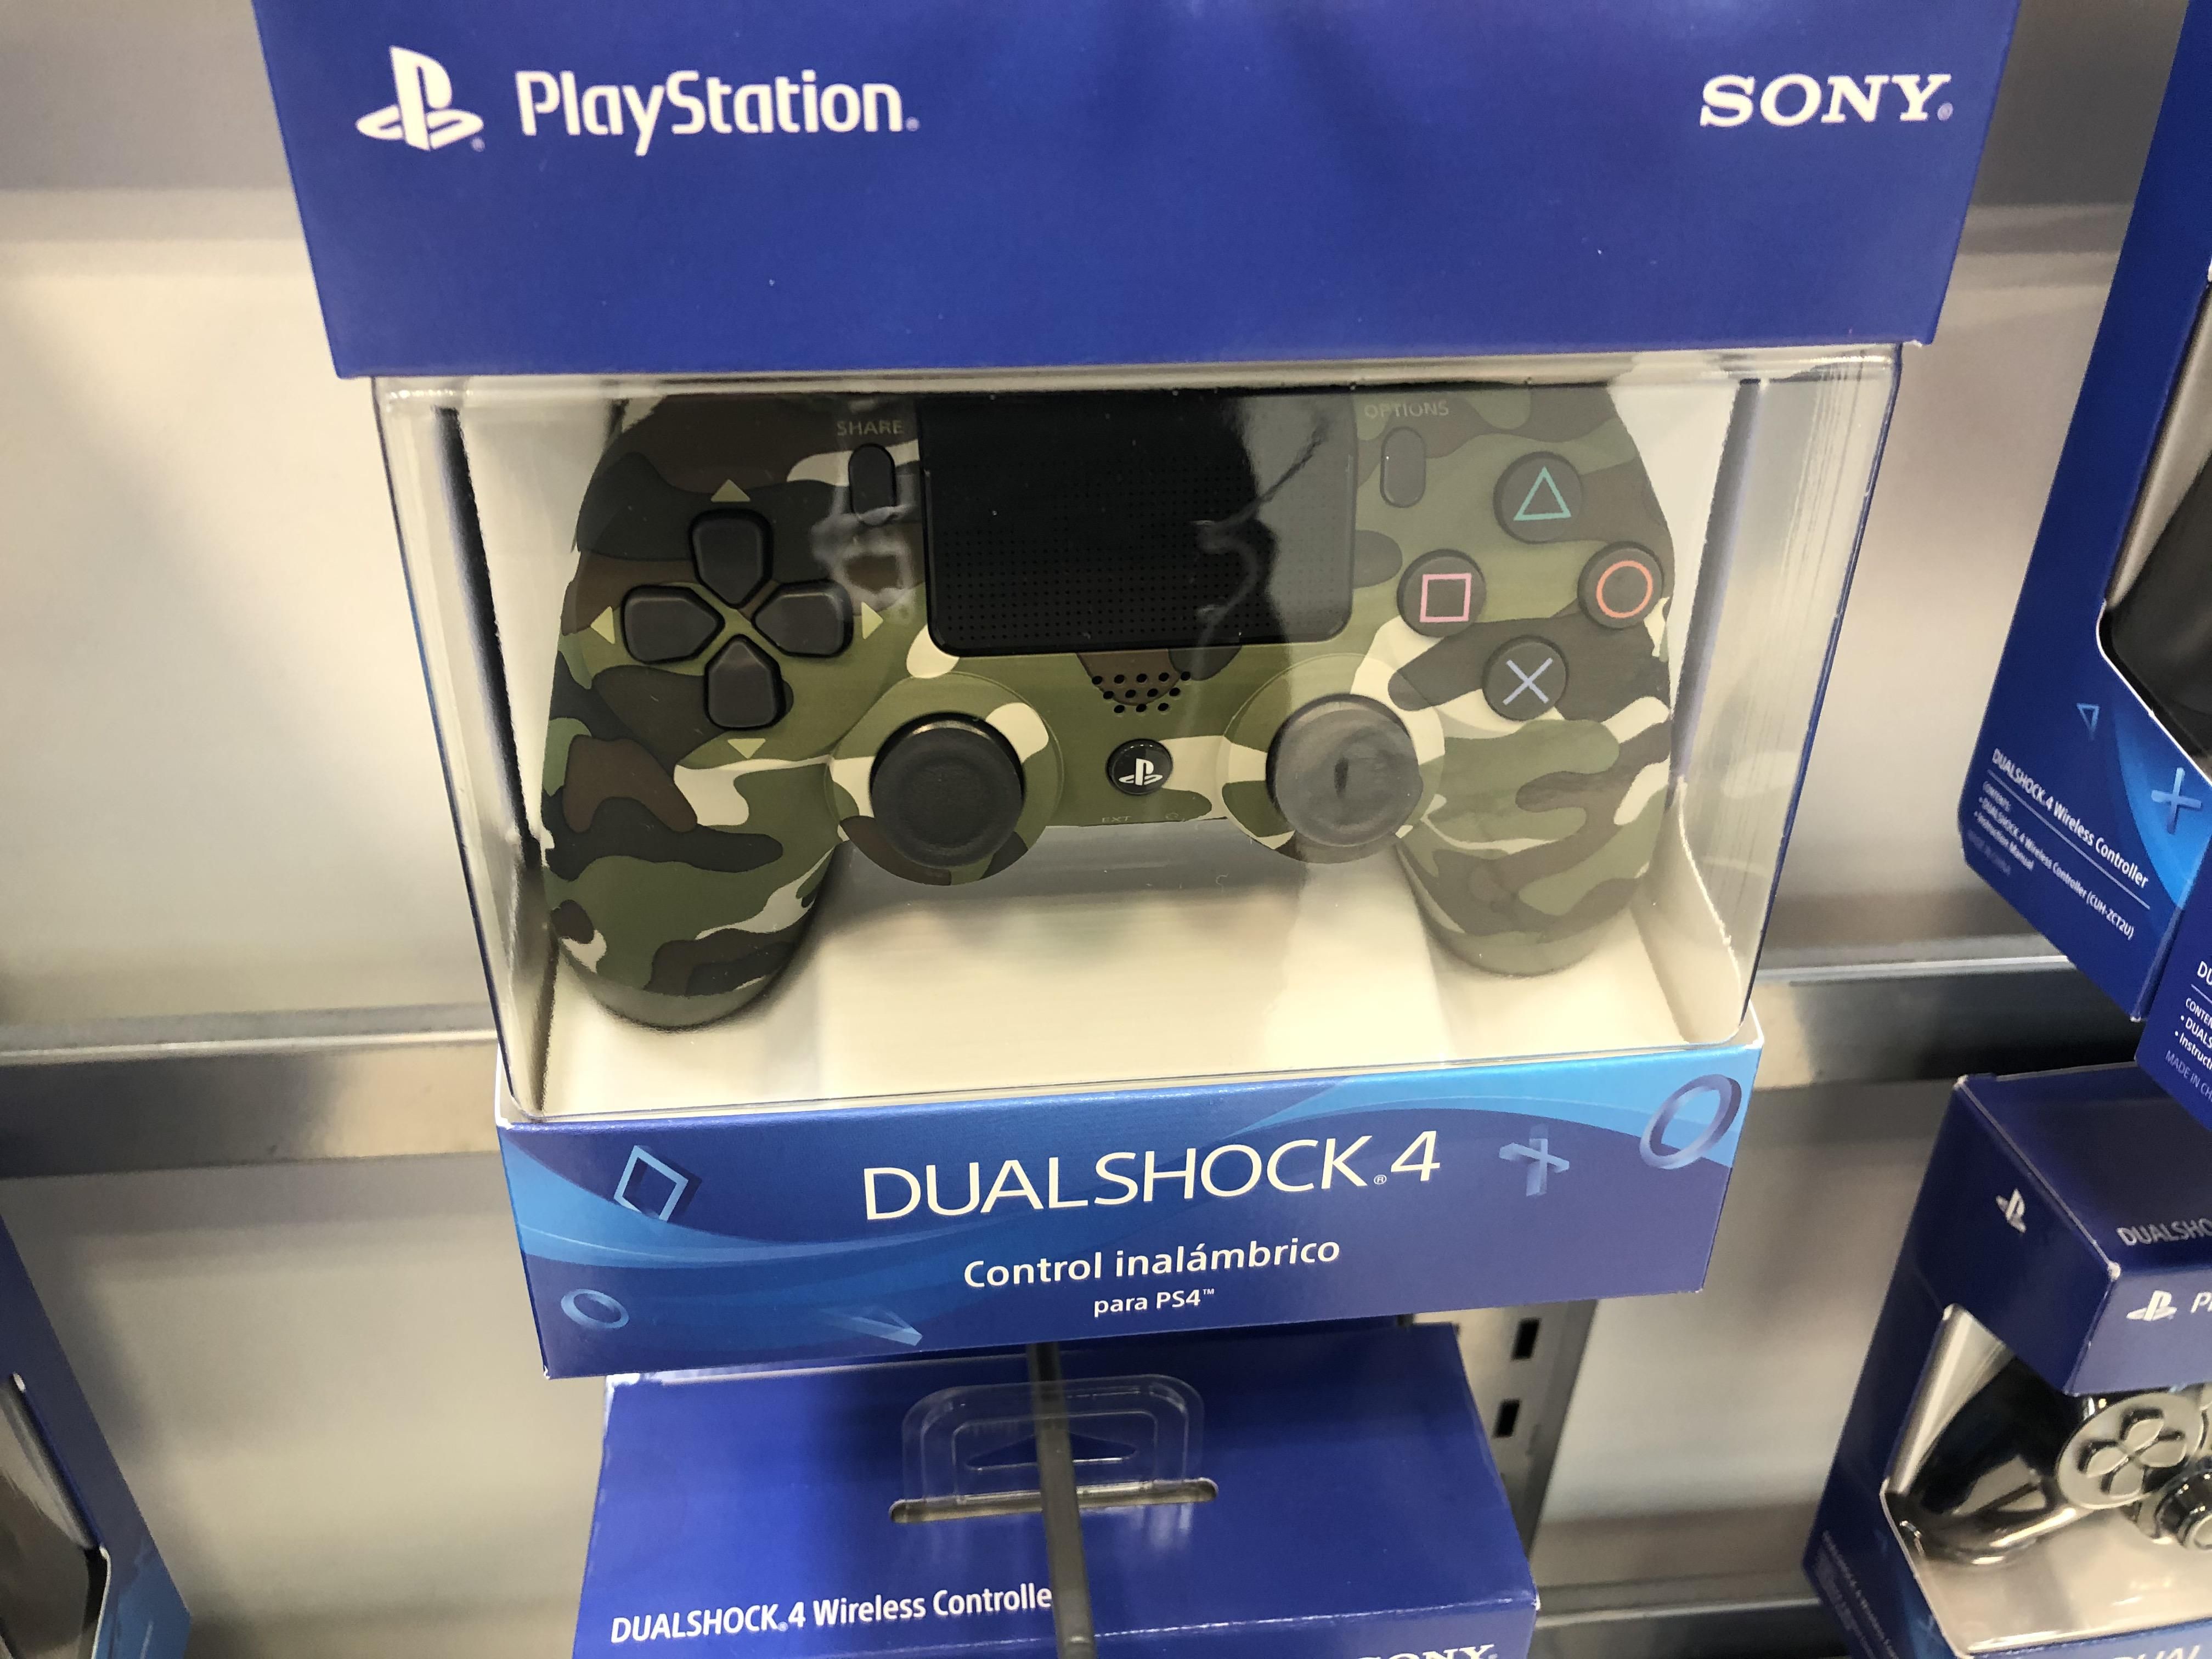 Found this empty box in the store. I think someone stole the controller